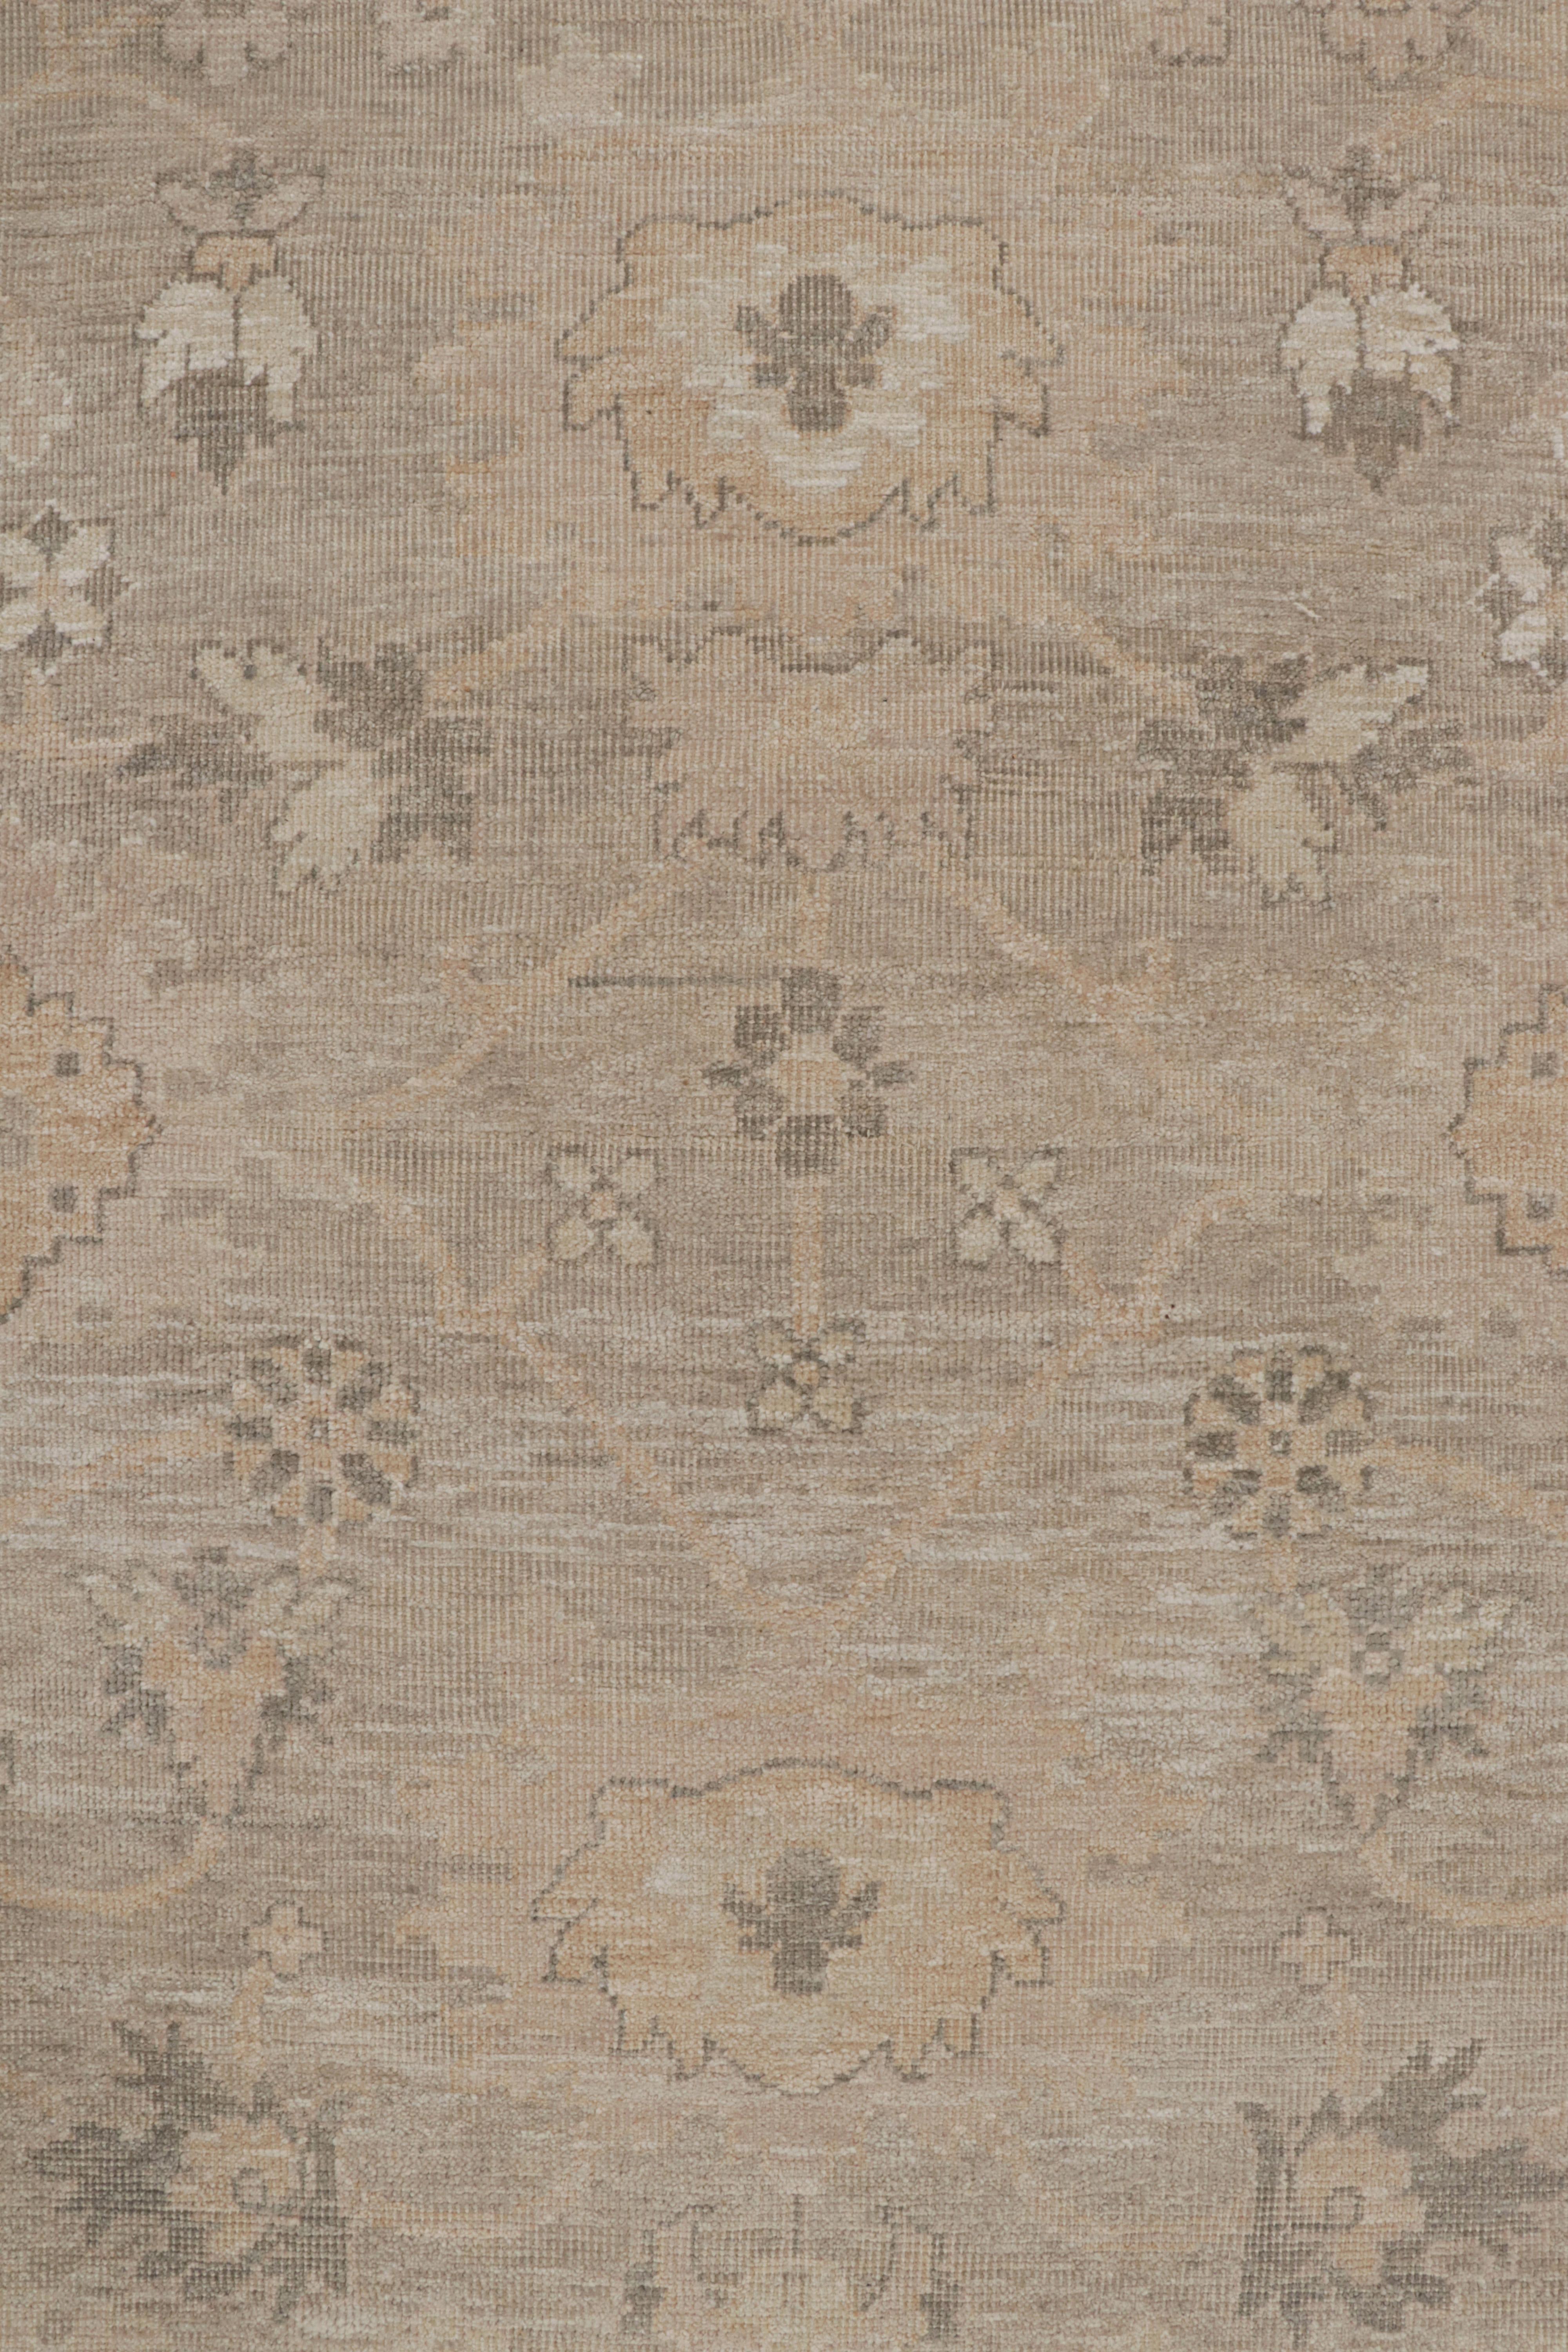 Contemporary Rug & Kilim’s Oushak Style Rug in Gray & Beige Floral Patterns For Sale